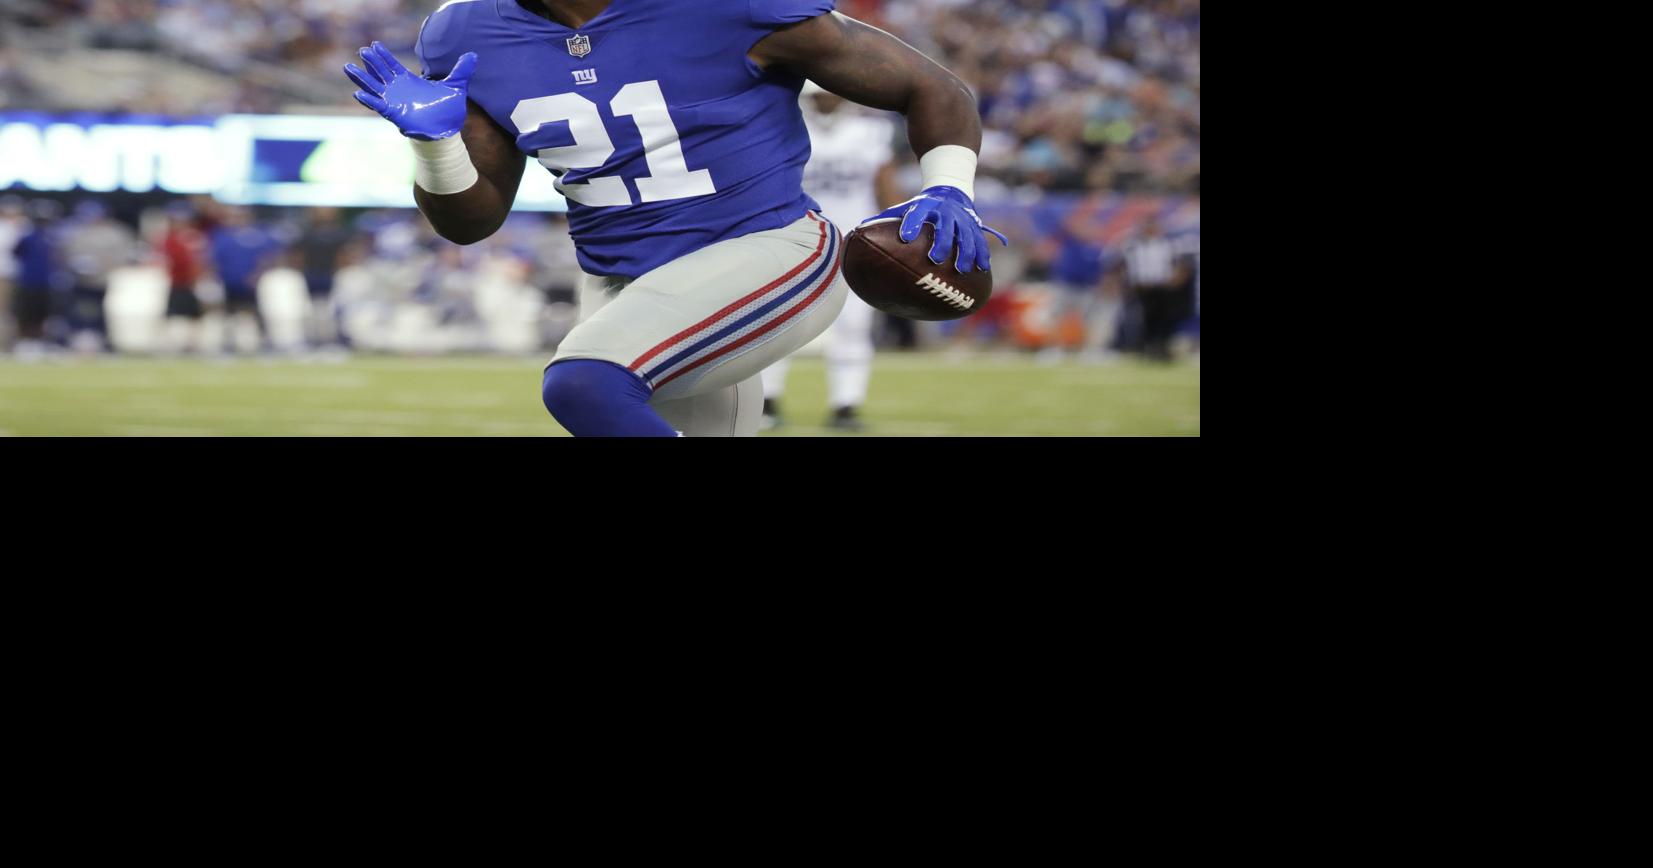 Landon Collins signing with Giants in reunion